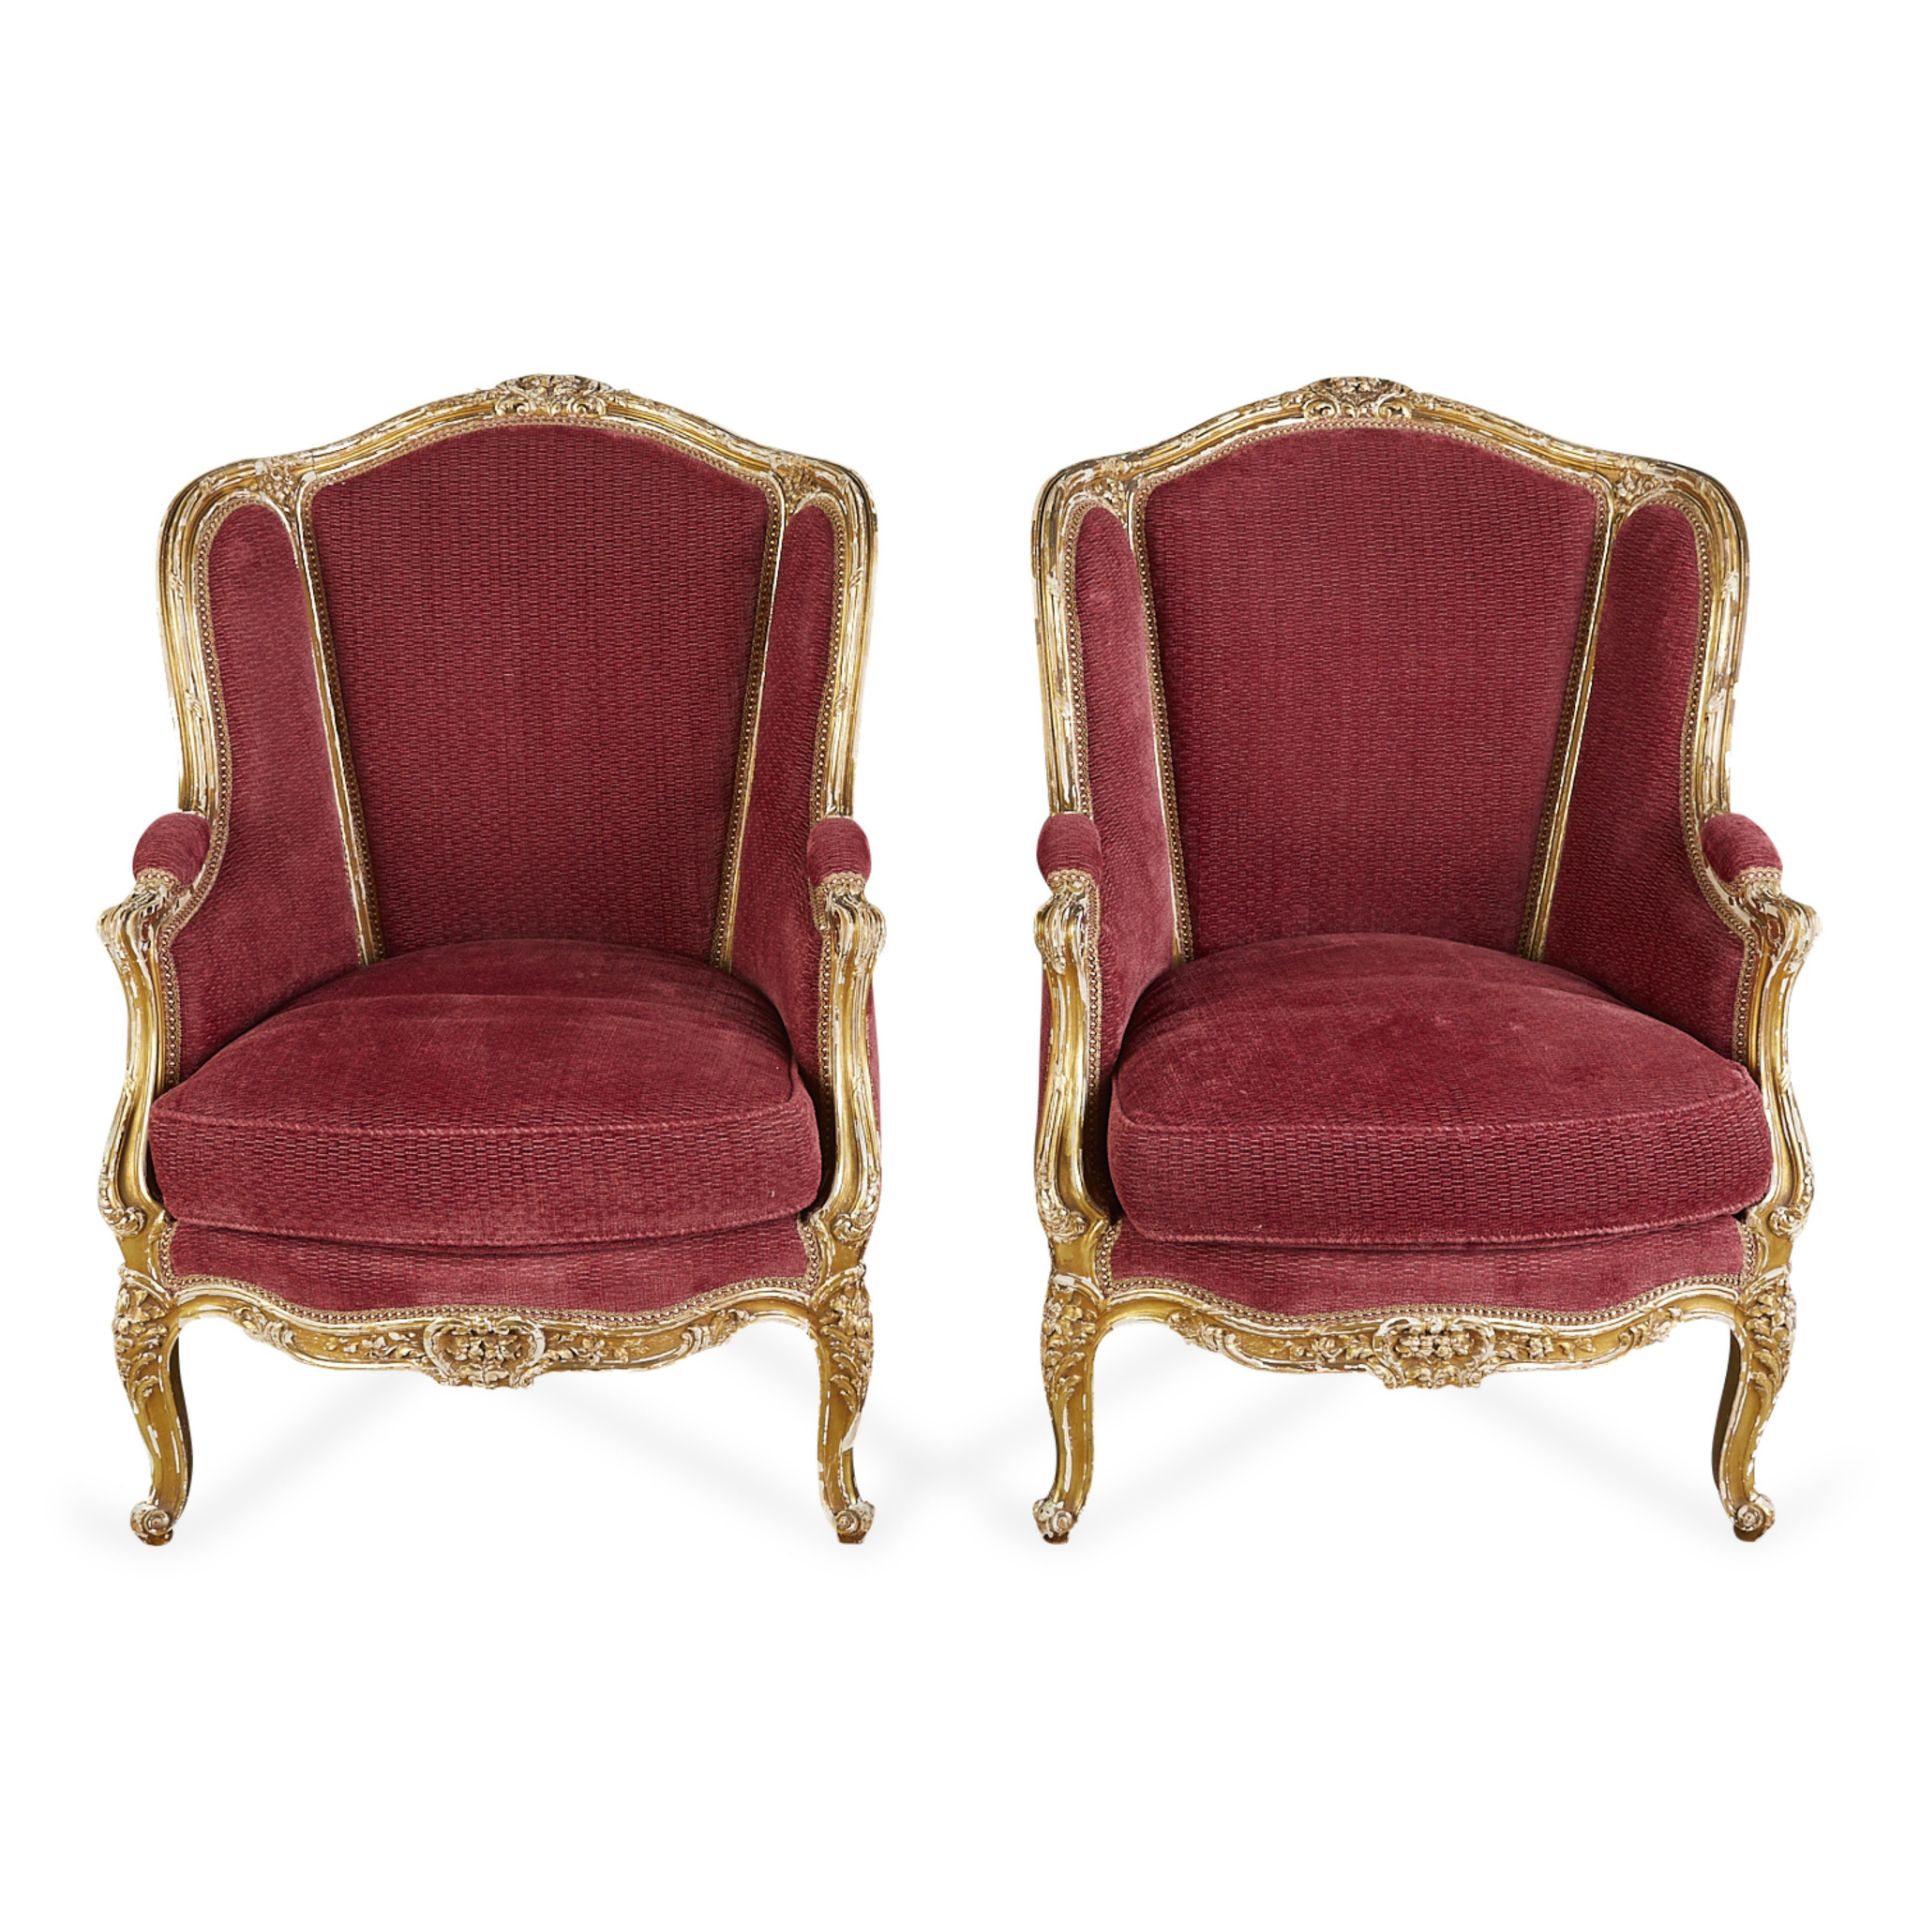 Pair of Louis XV Style Gilt Armchairs - Image 8 of 12